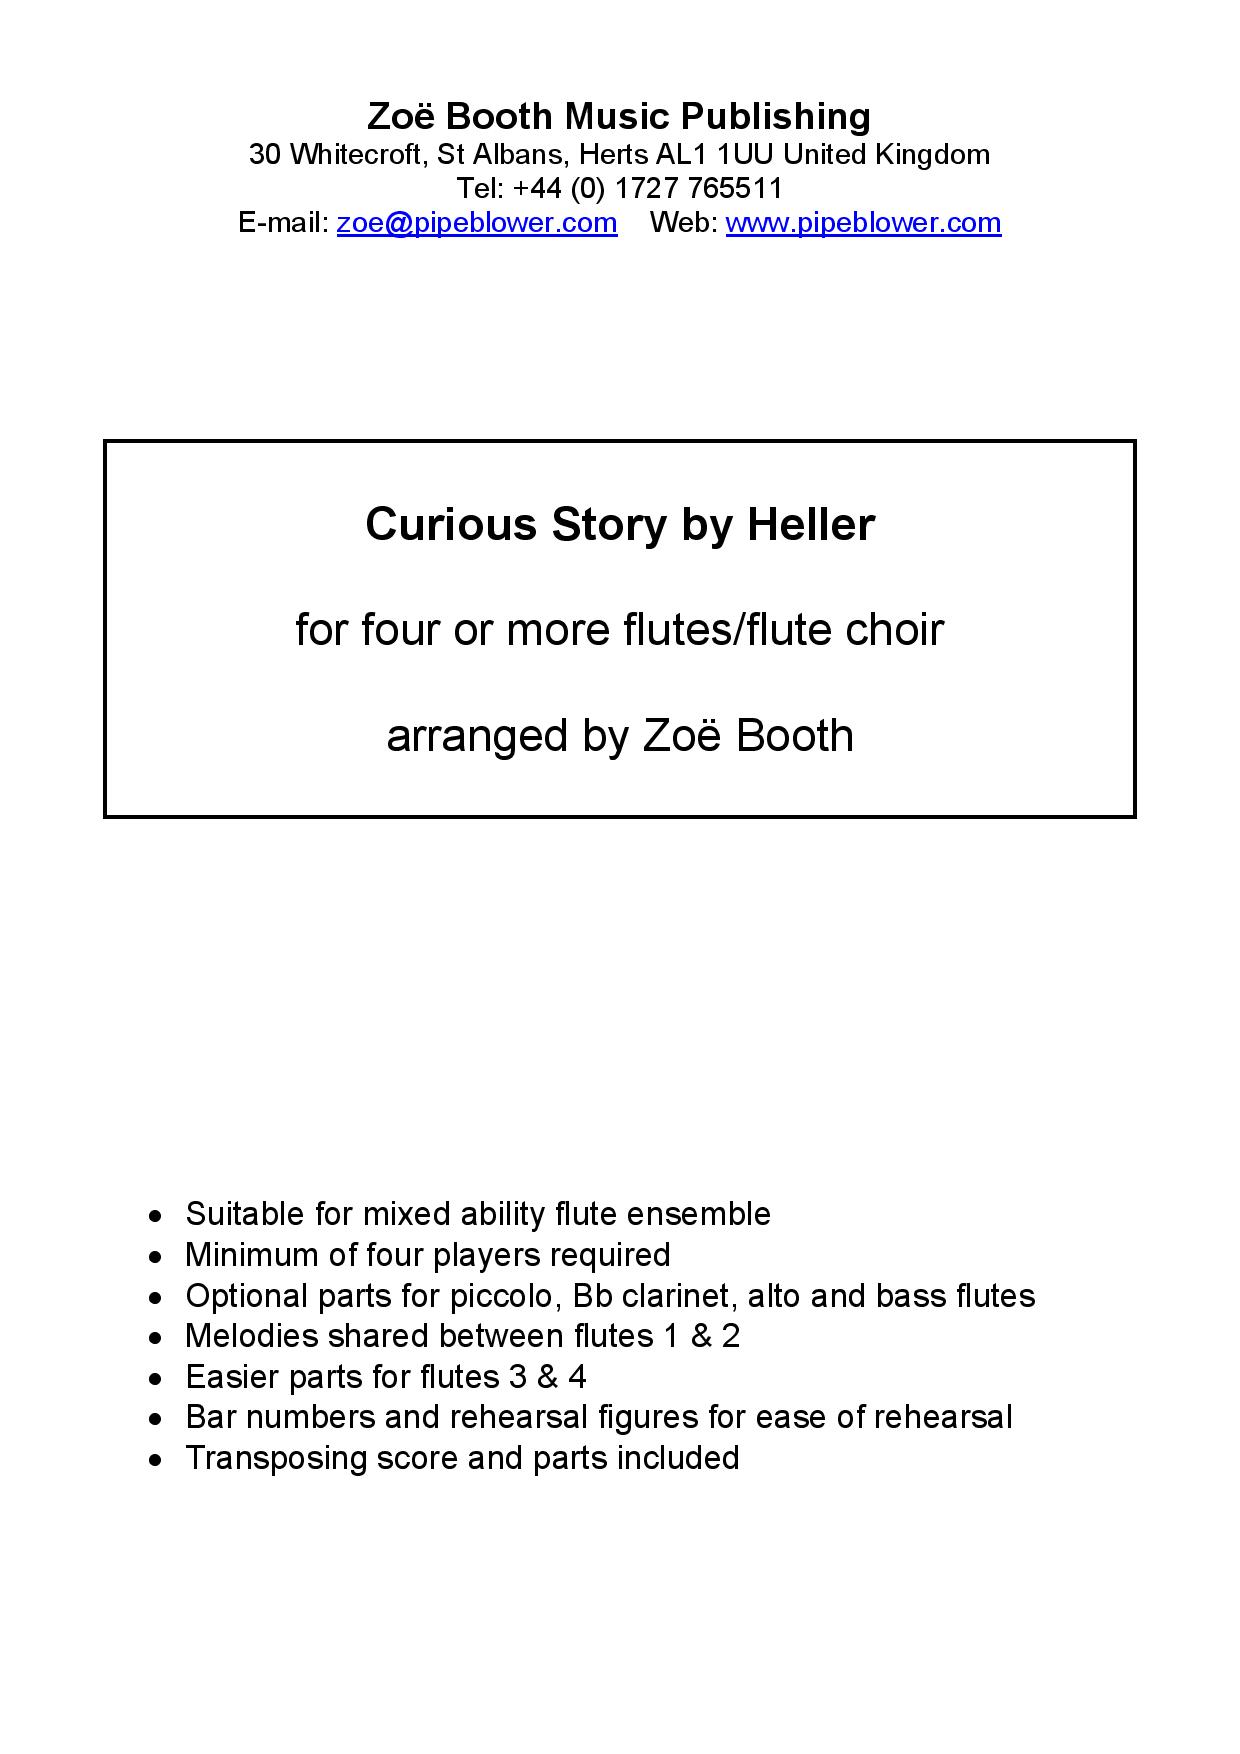 Curious Story by Heller,  arranged by Zoë Booth for four or more flutes/flute choir